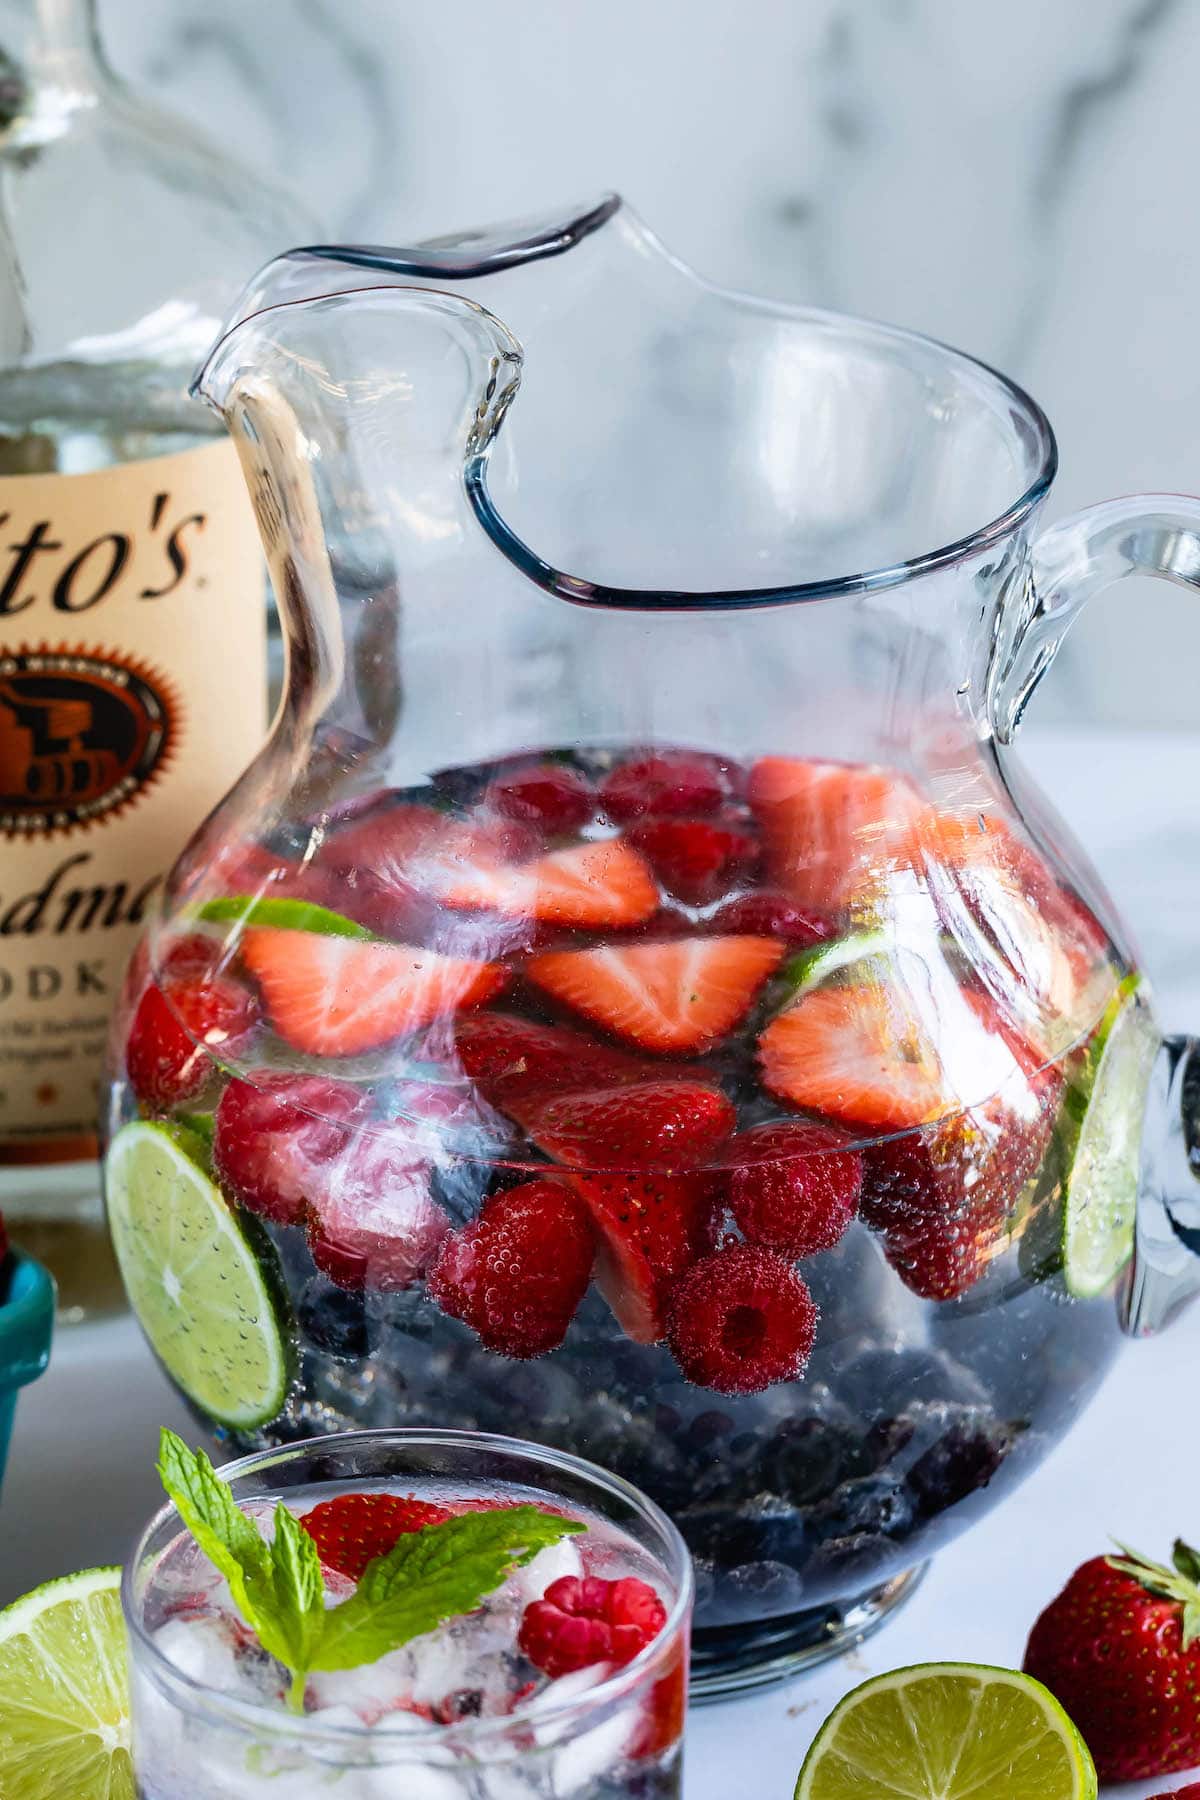 24 Cocktail Pitcher Recipes for Festive Flavor at Your Next Party